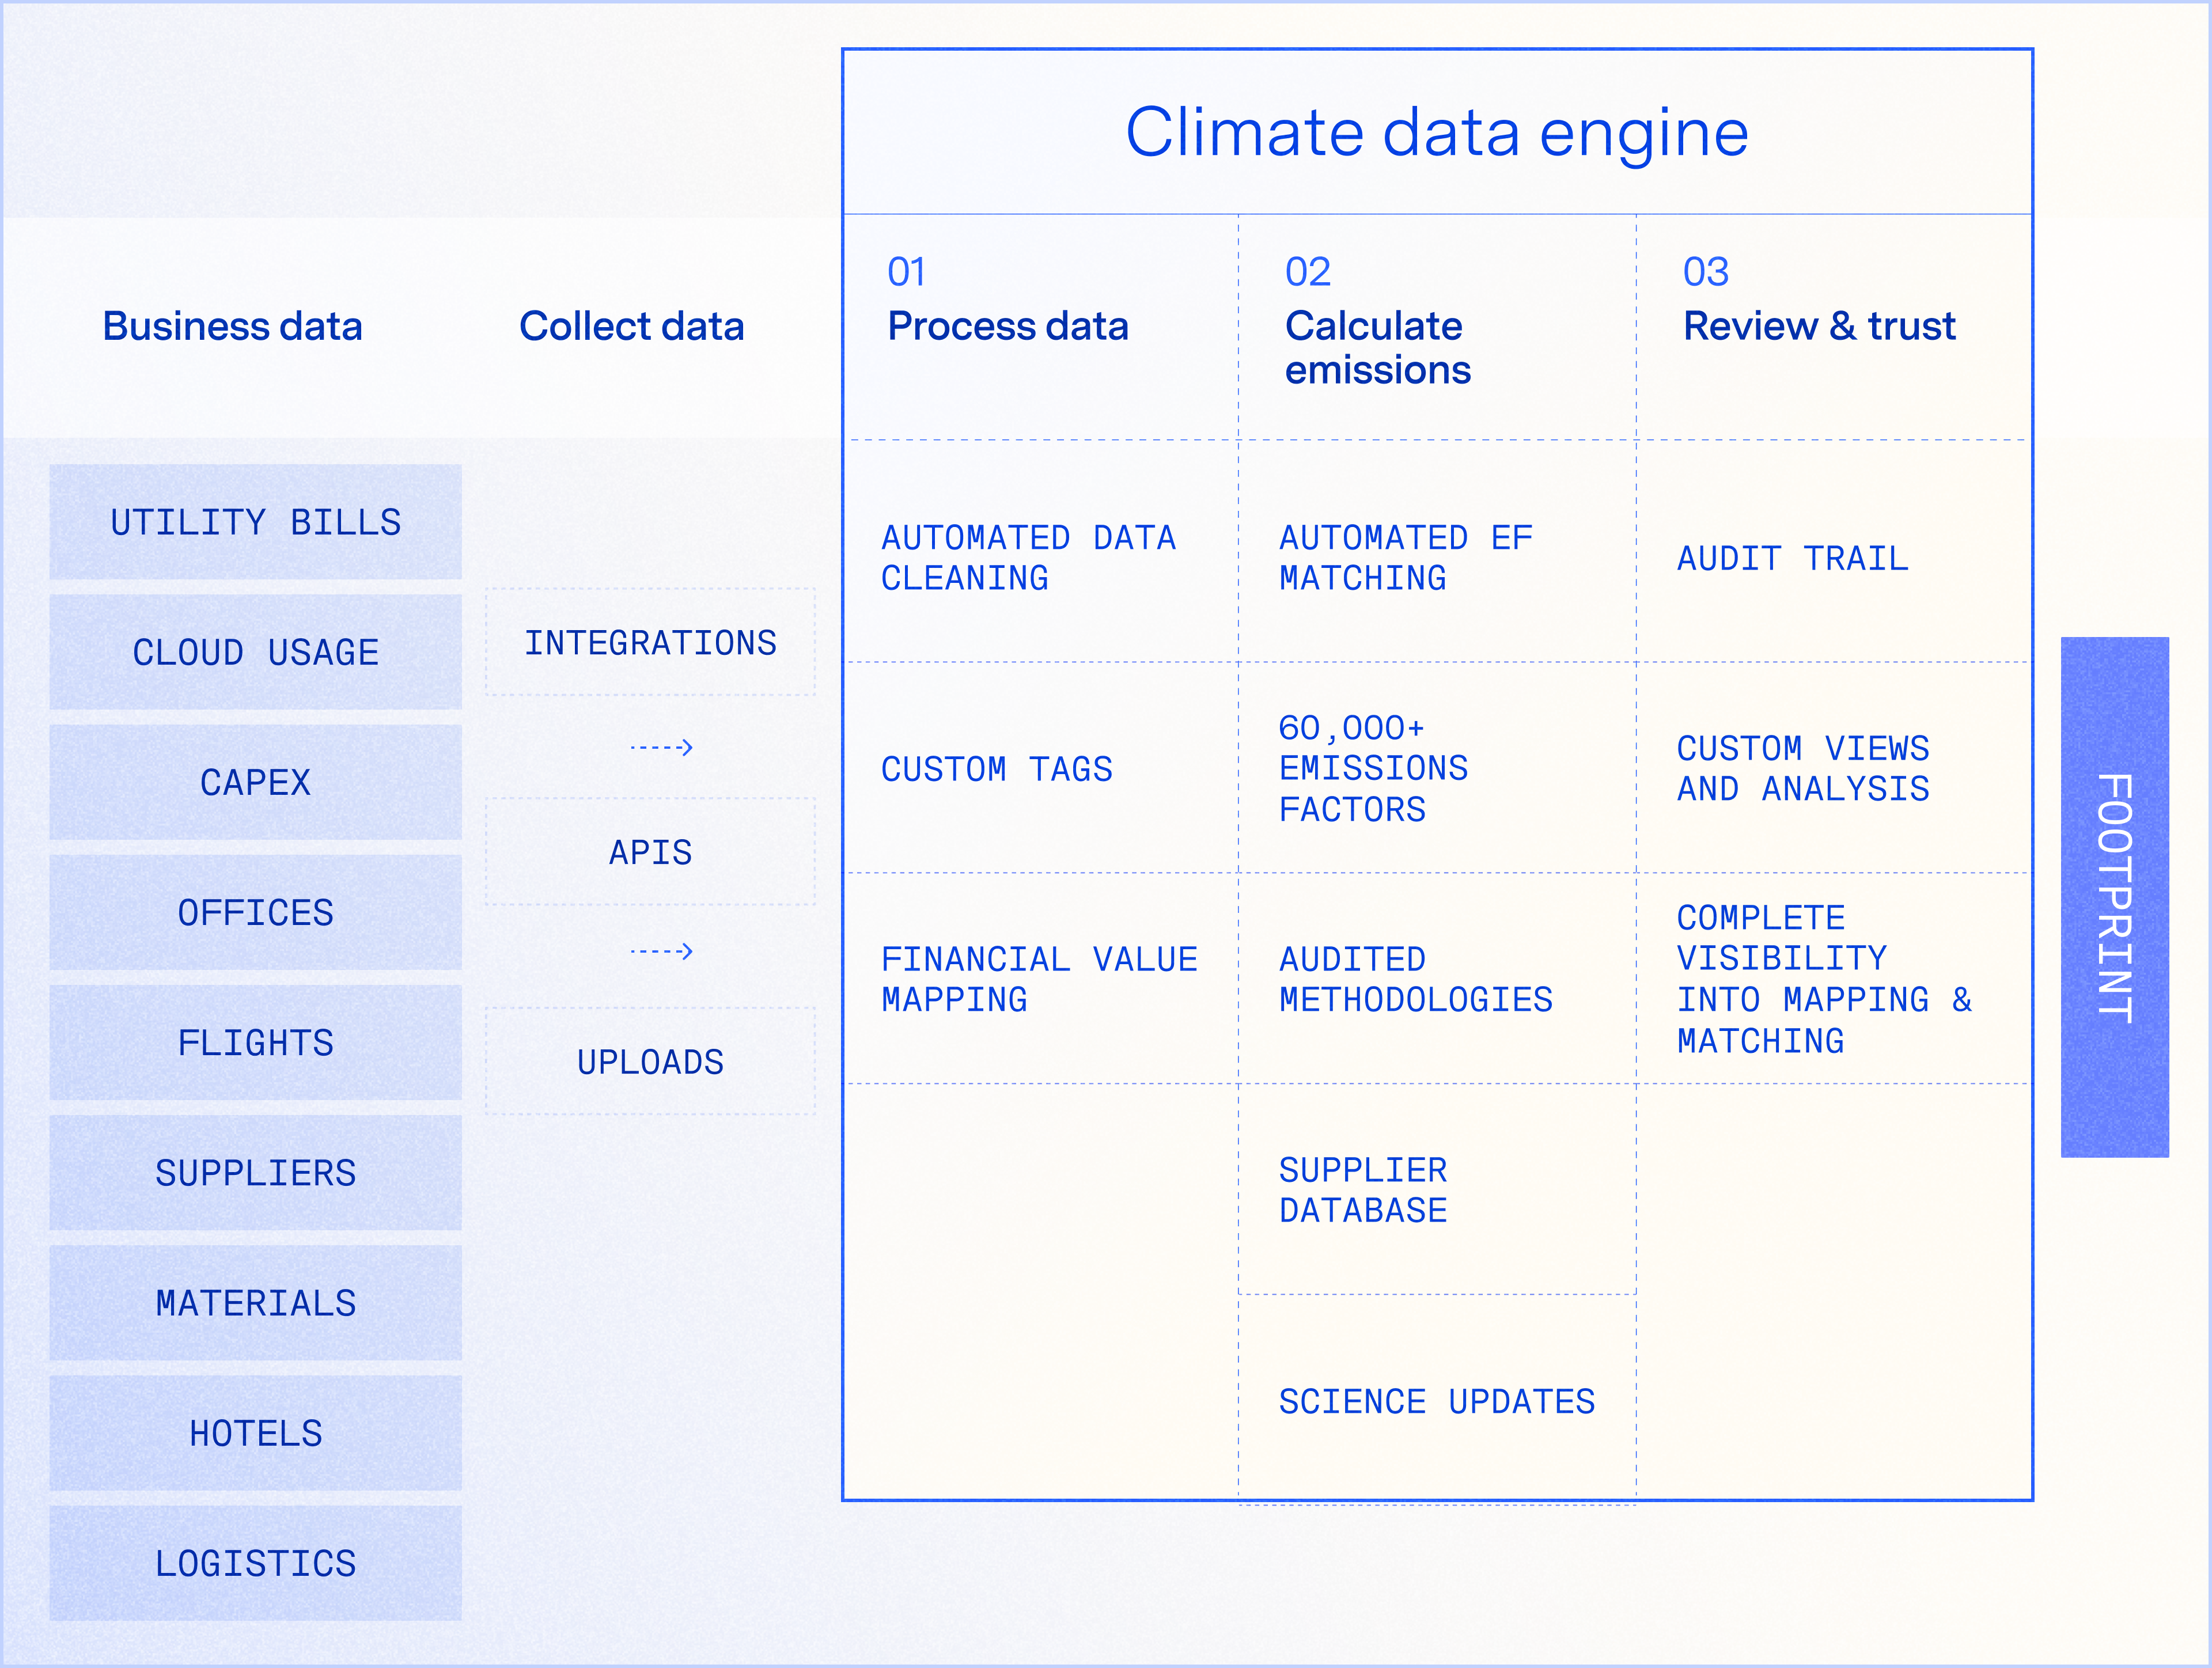 Diagram showing how the Climate data engine works